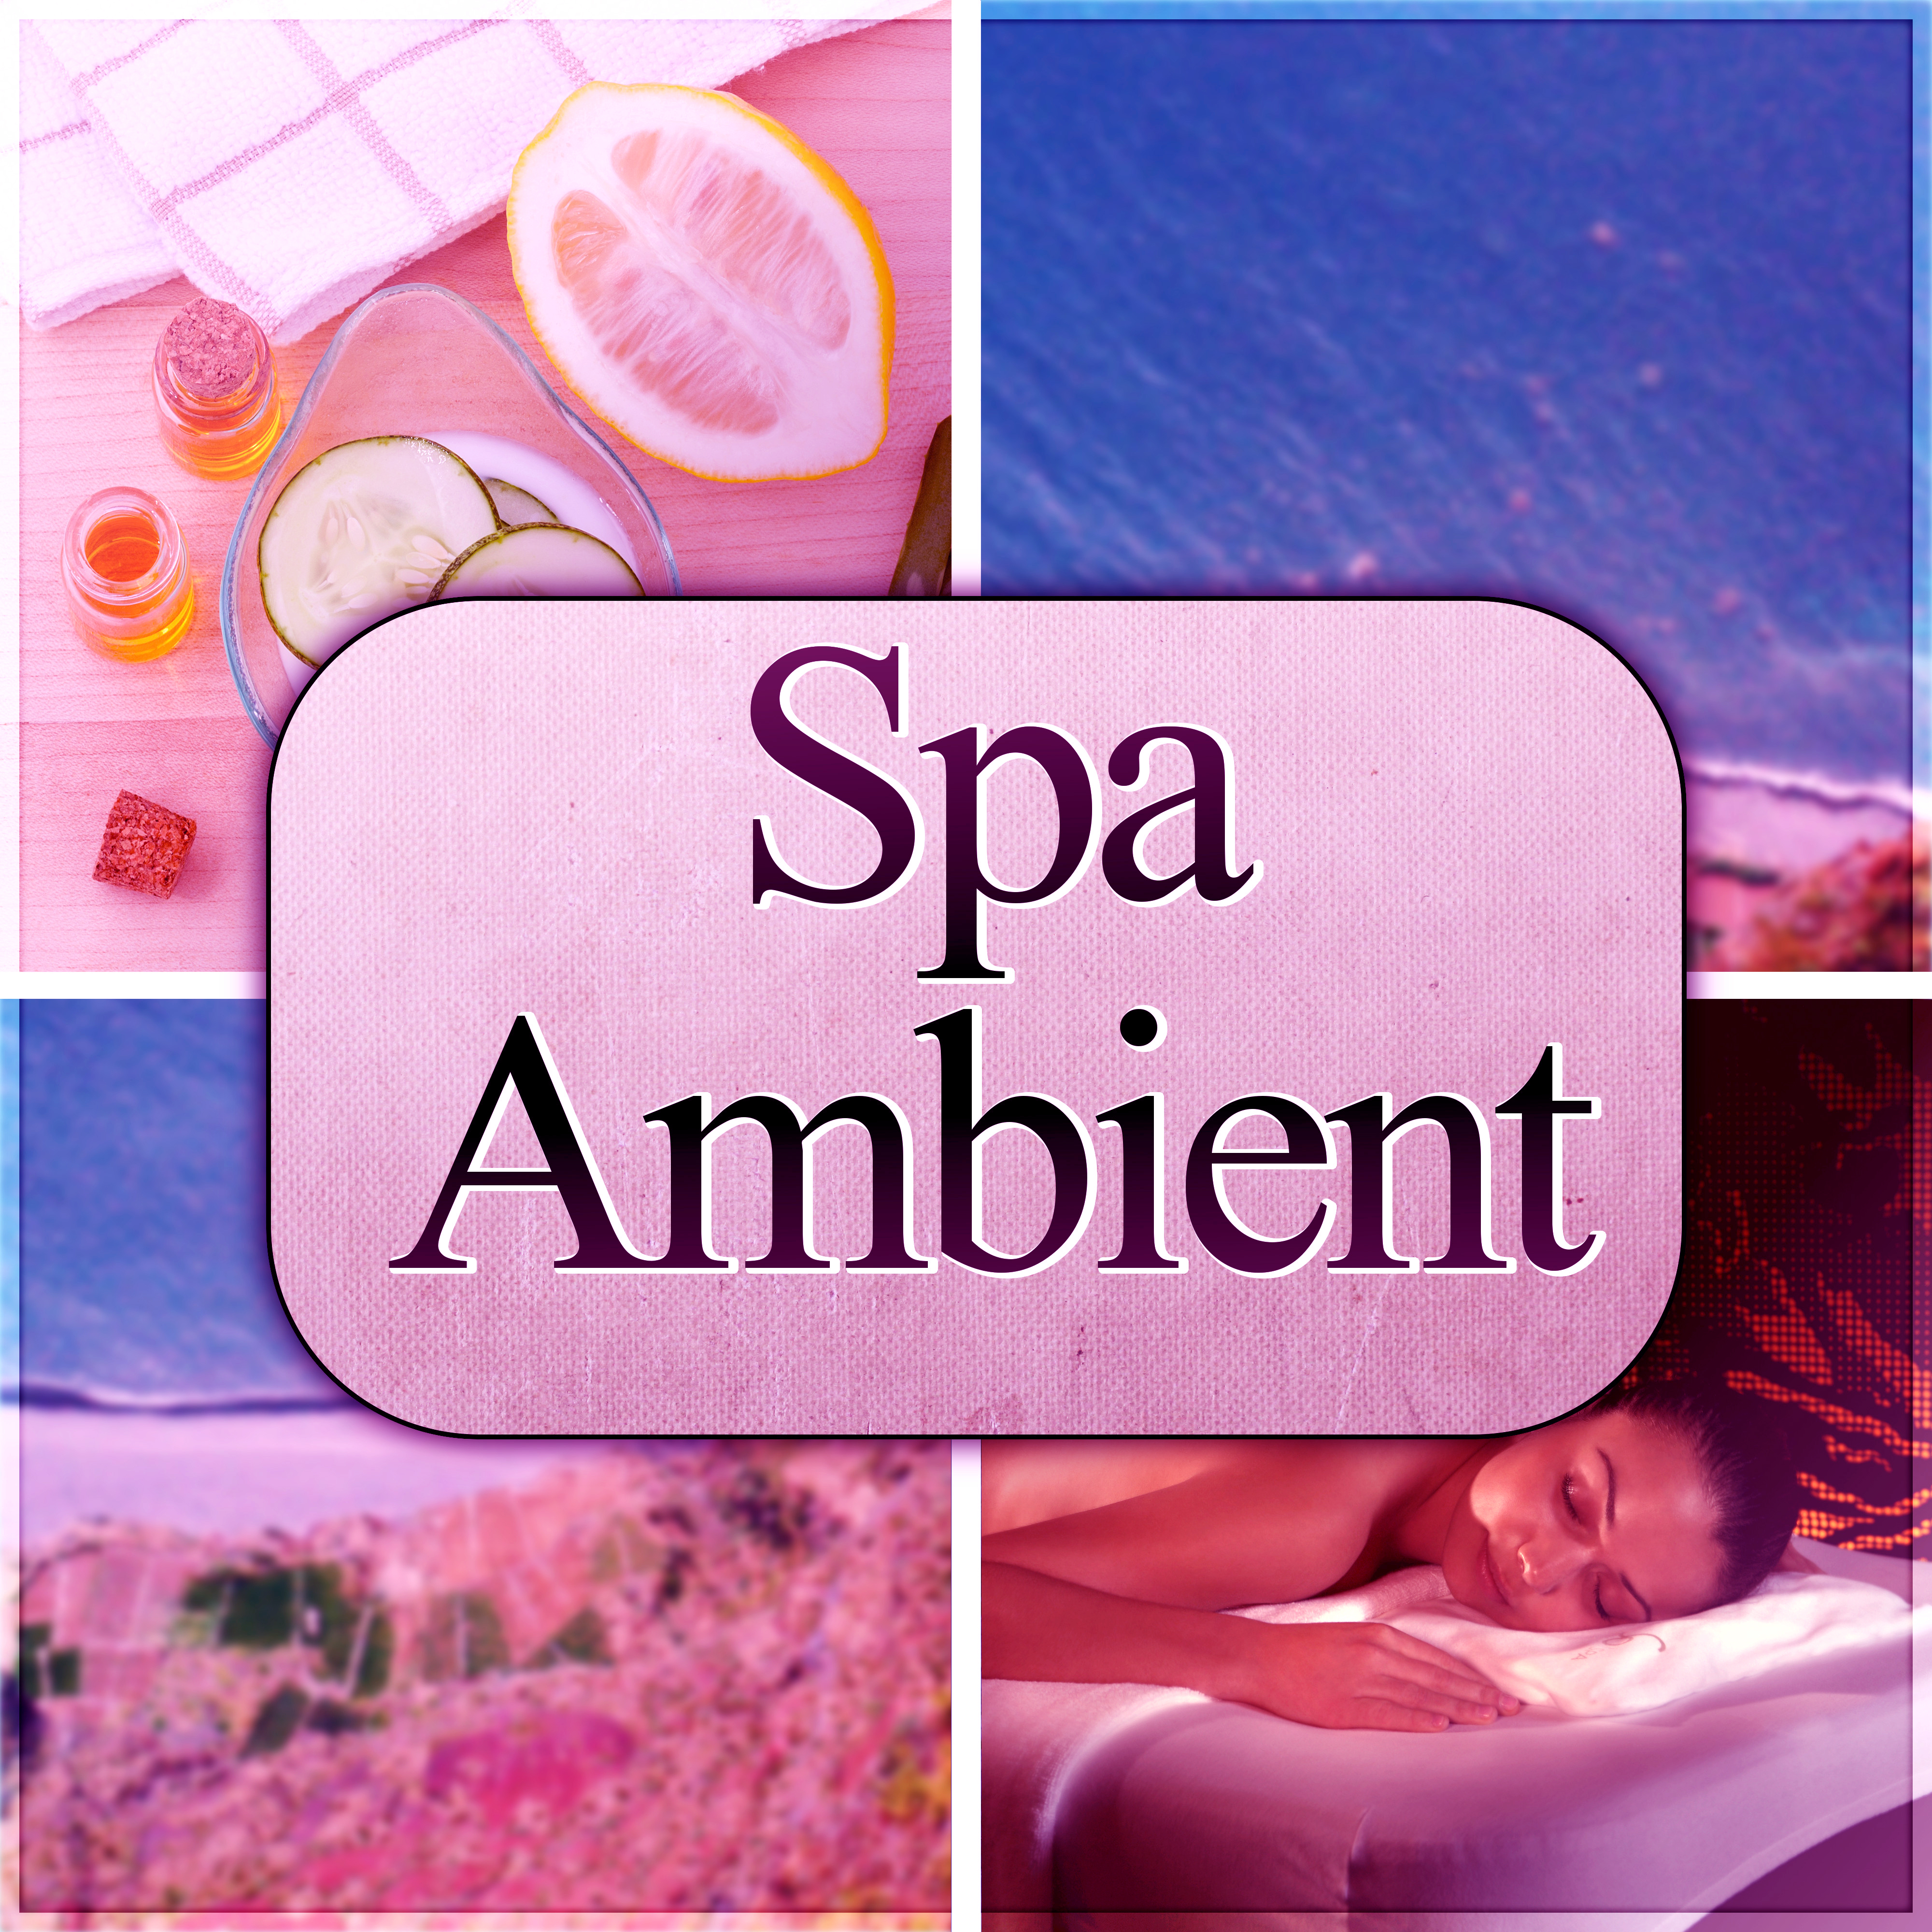 Spa Ambient - Mindfulness Meditation Spiritual Healing, Tranquility Spa & Relax, Mind and Body Harmony, Beckground Music, Yoga, Massage Music, Gentle Touch